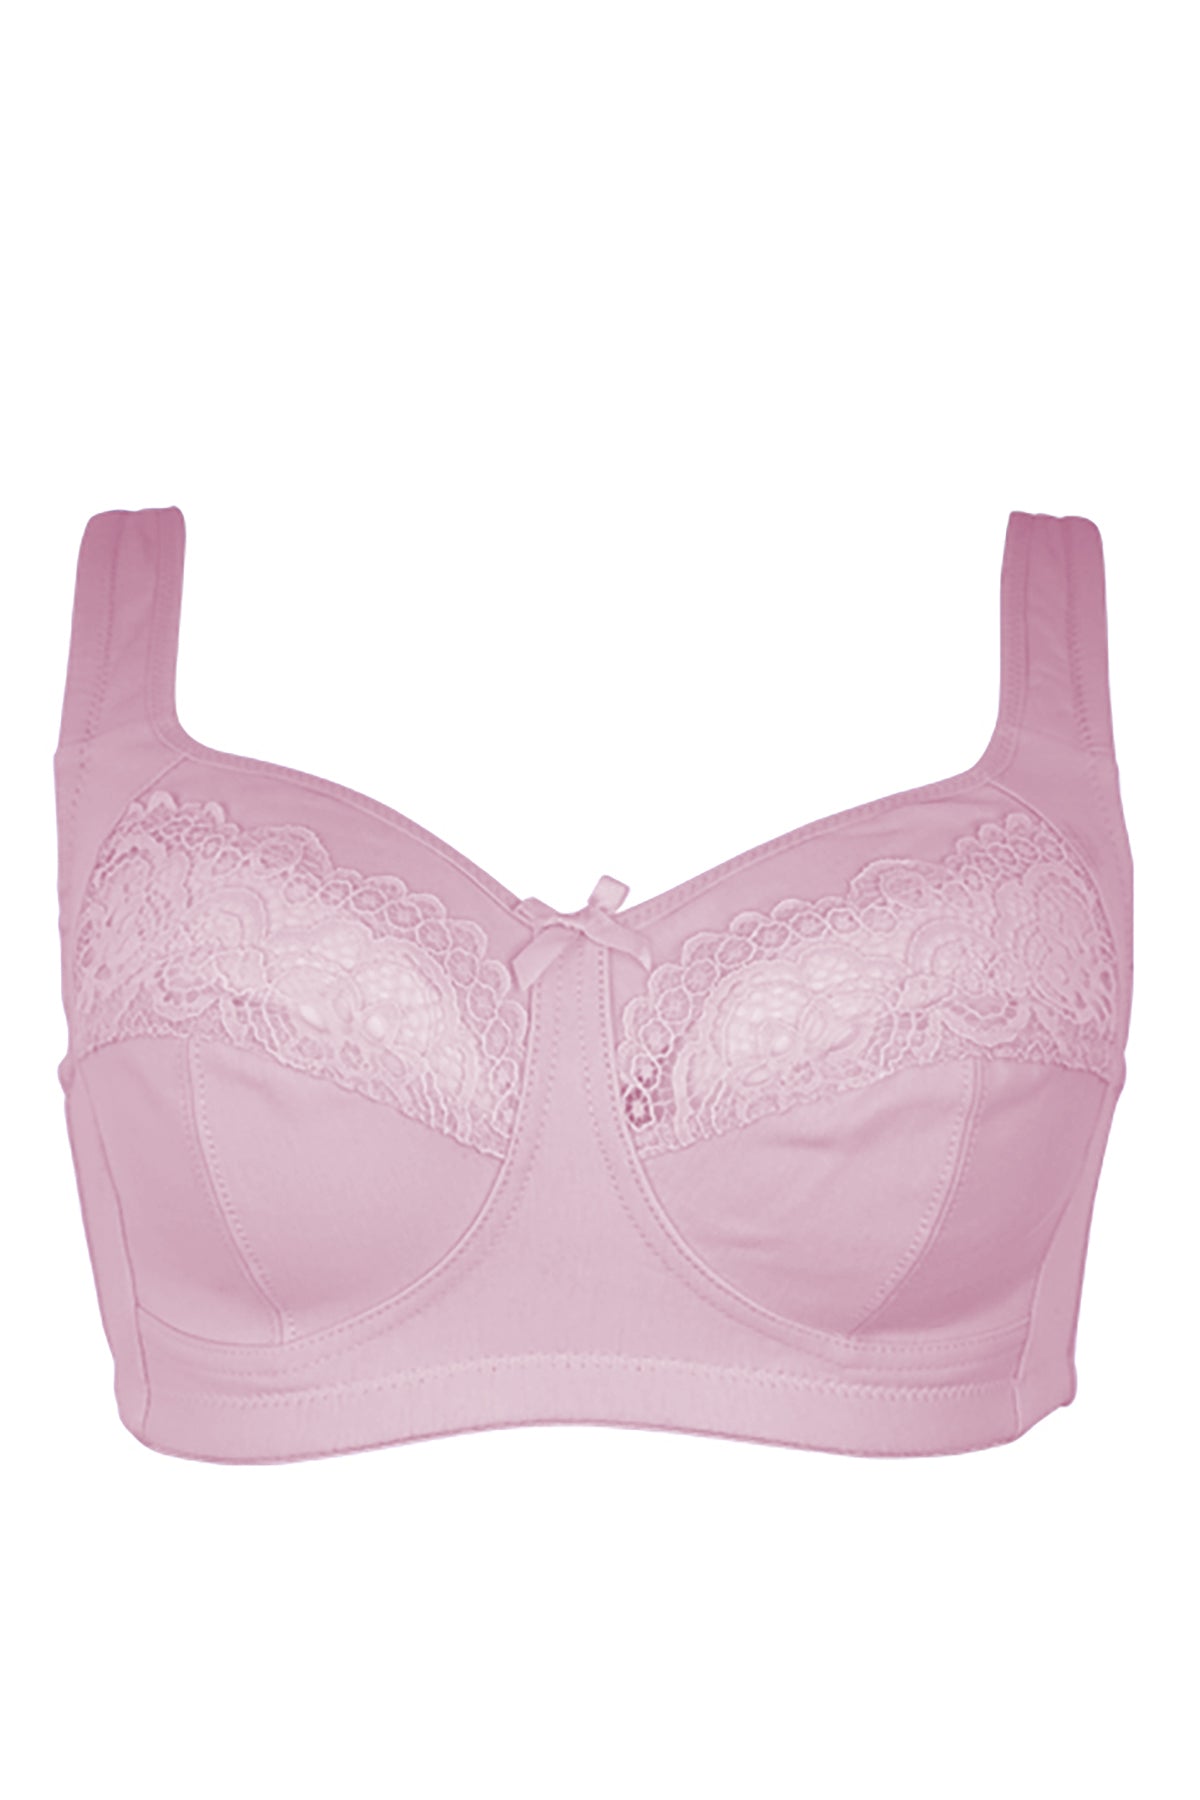 BLS - Cece Non Wired And Non Padded Cotton Bra - Pink – Makeup City Pakistan